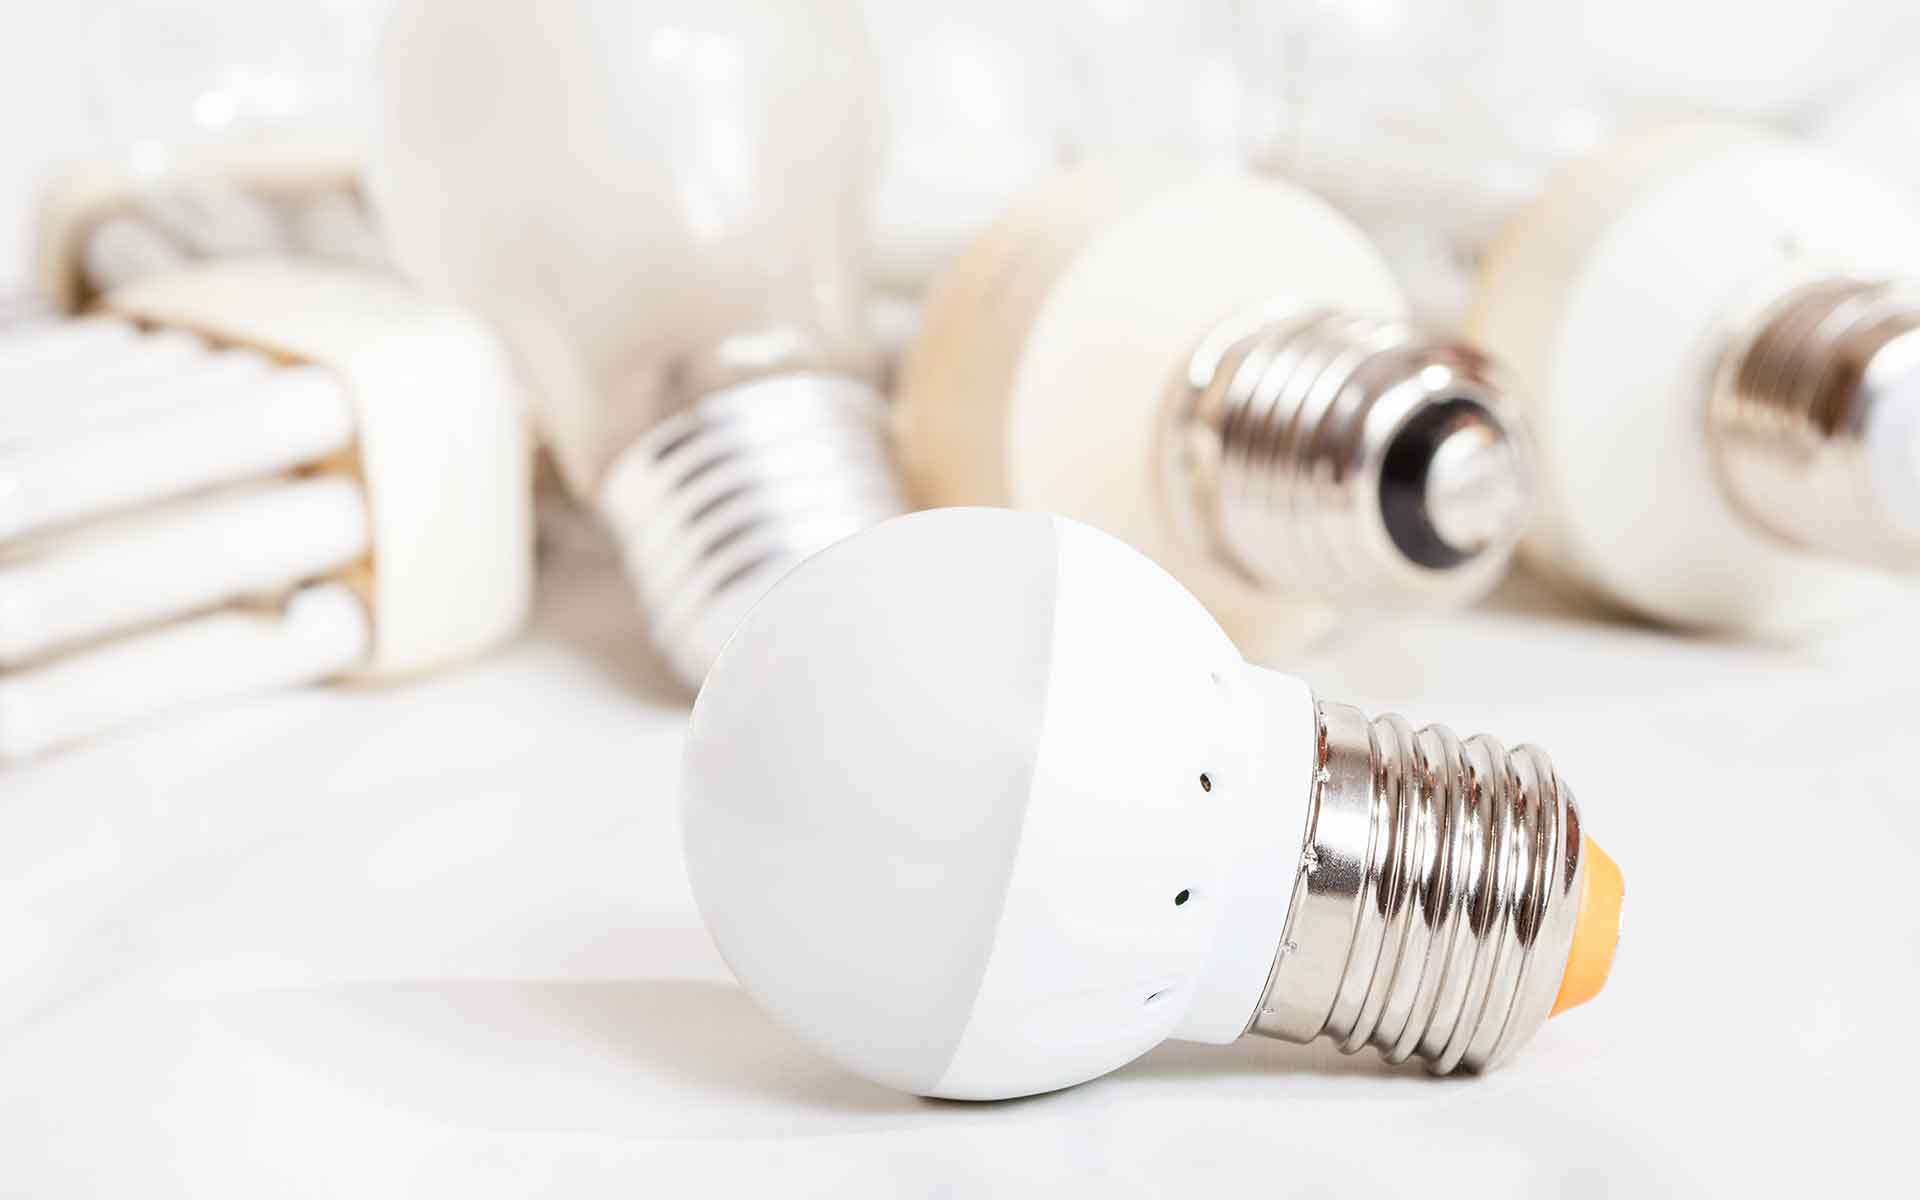 Revolutionising the energy network, one LED light at a time Image